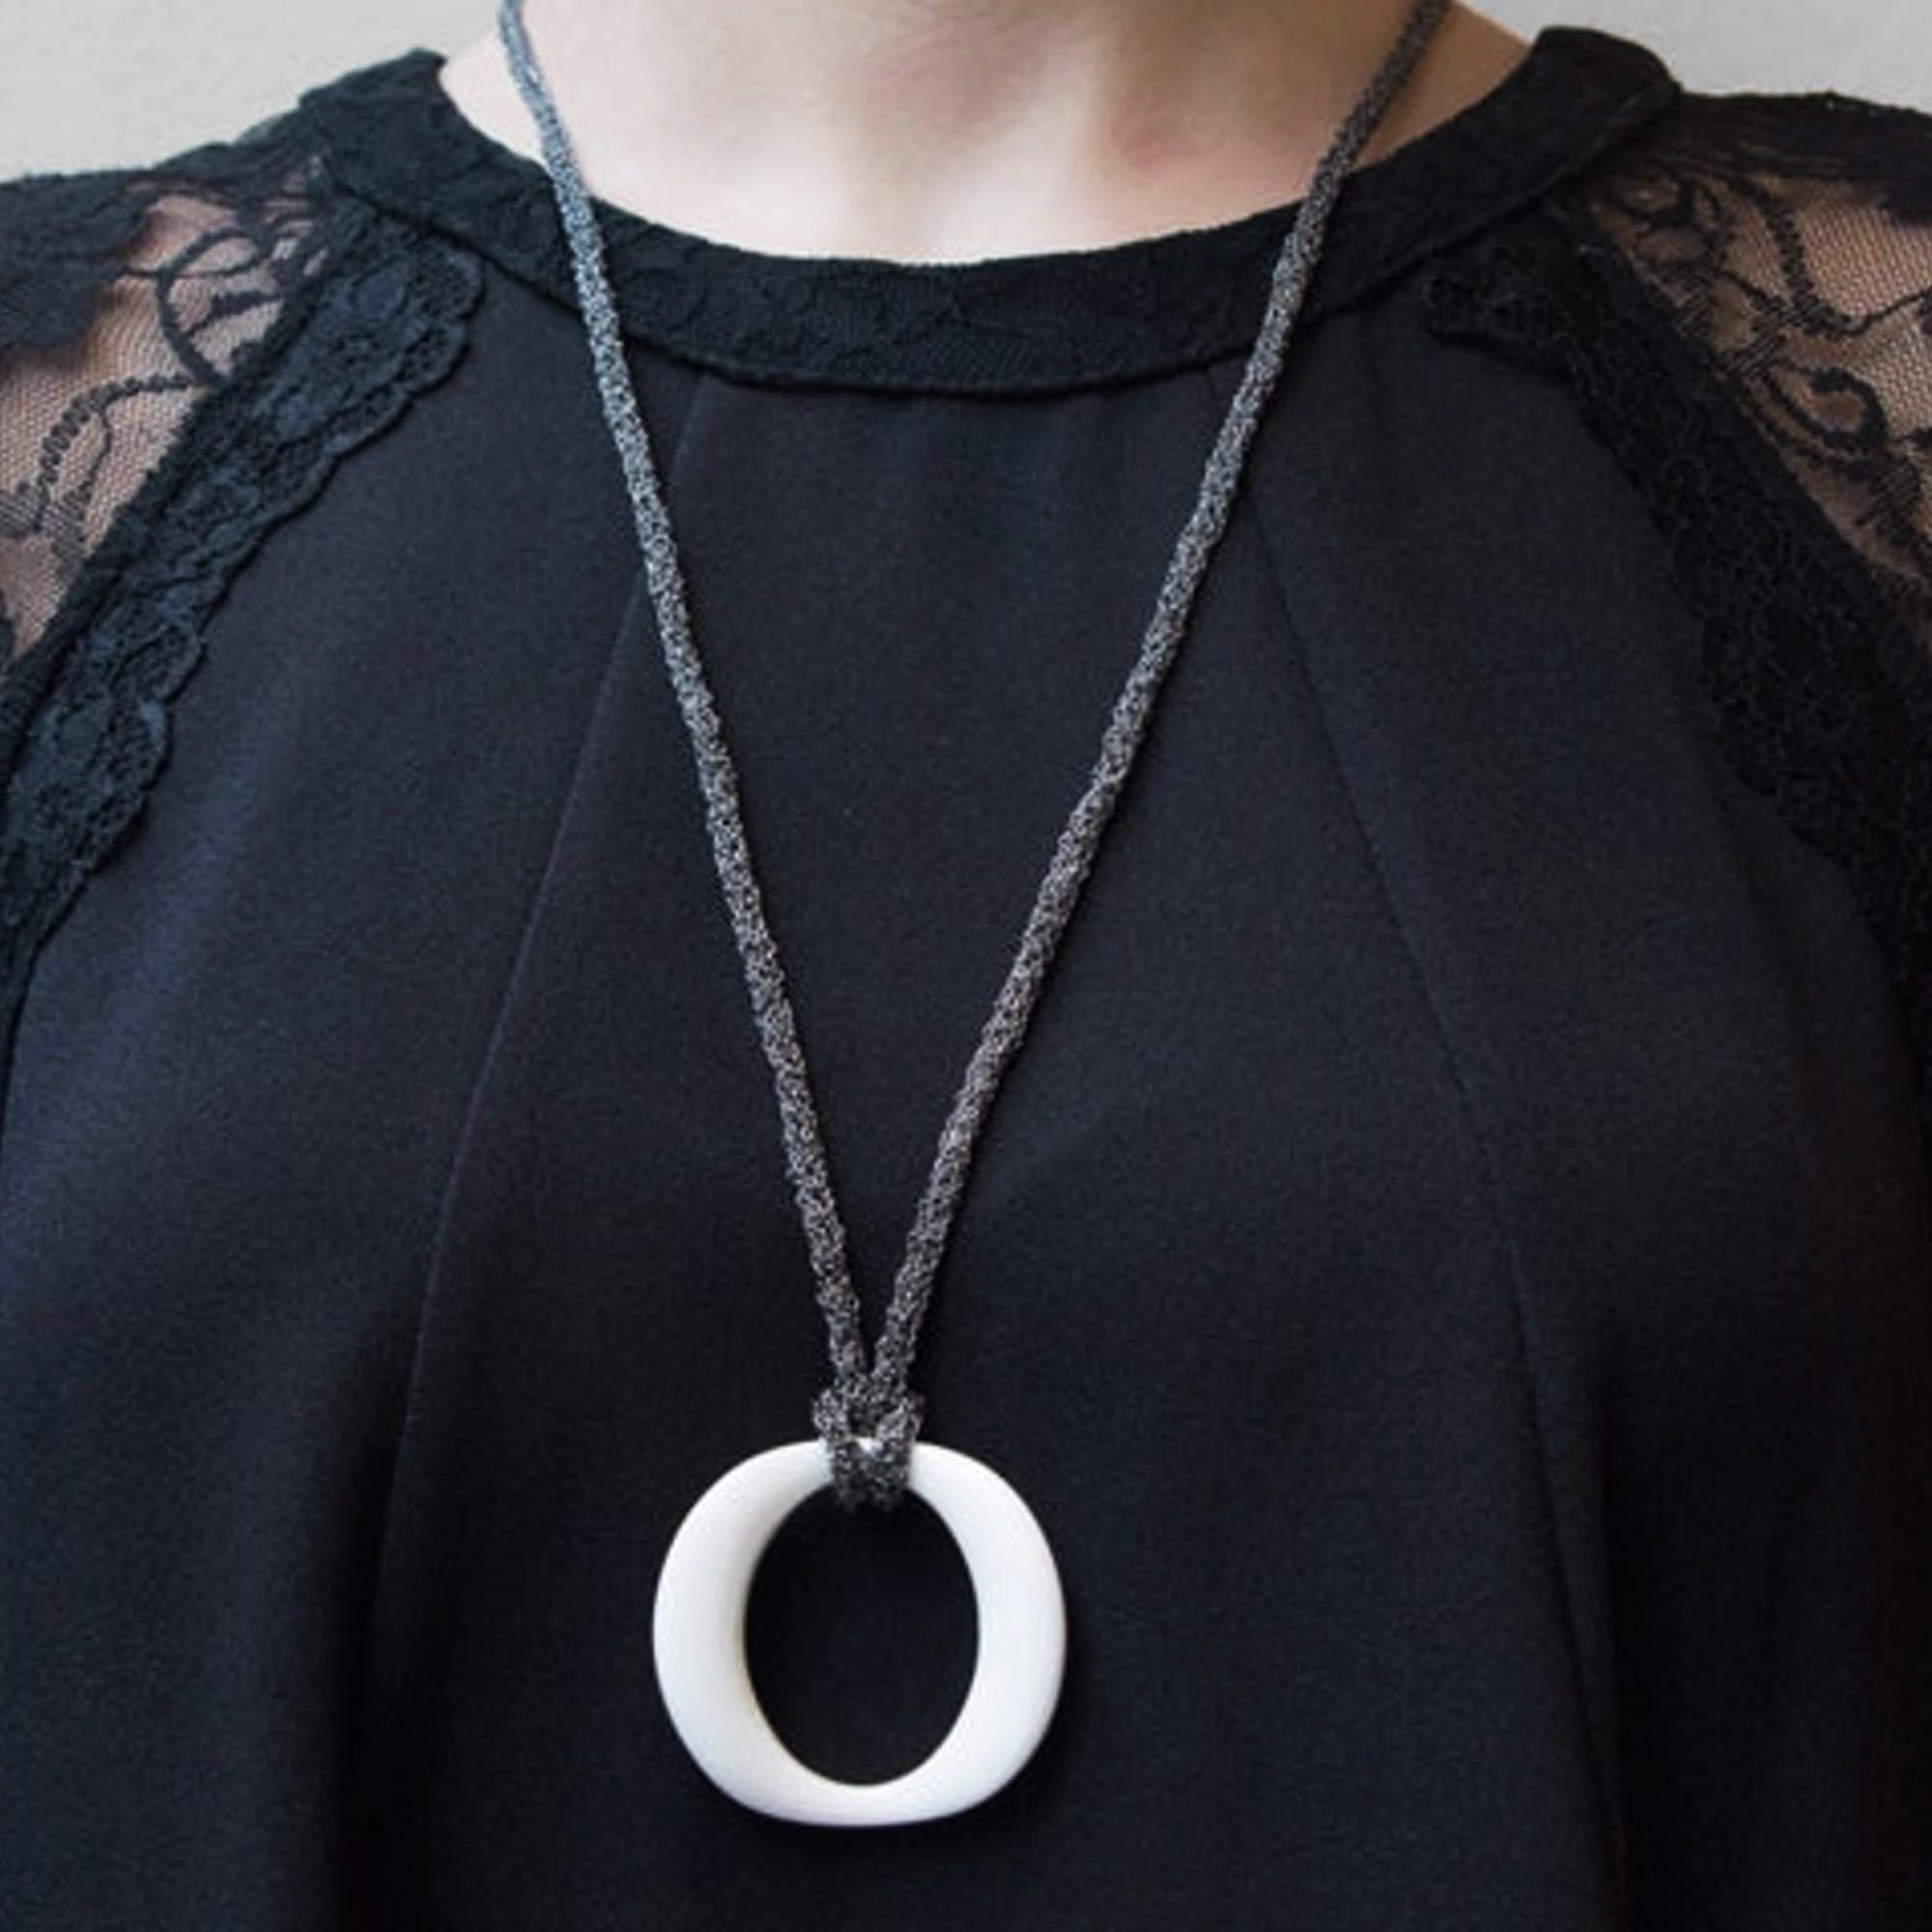 Alex Jona design collection, hand crafted in Italy, dark rhodium plate sterling silver long necklace, 35.43 inch- 90cm long, made of woven small chains knotted  with a white agate pendant, 1.70 inch-4.3cm diameter.

Alex Jona jewels stand out, not